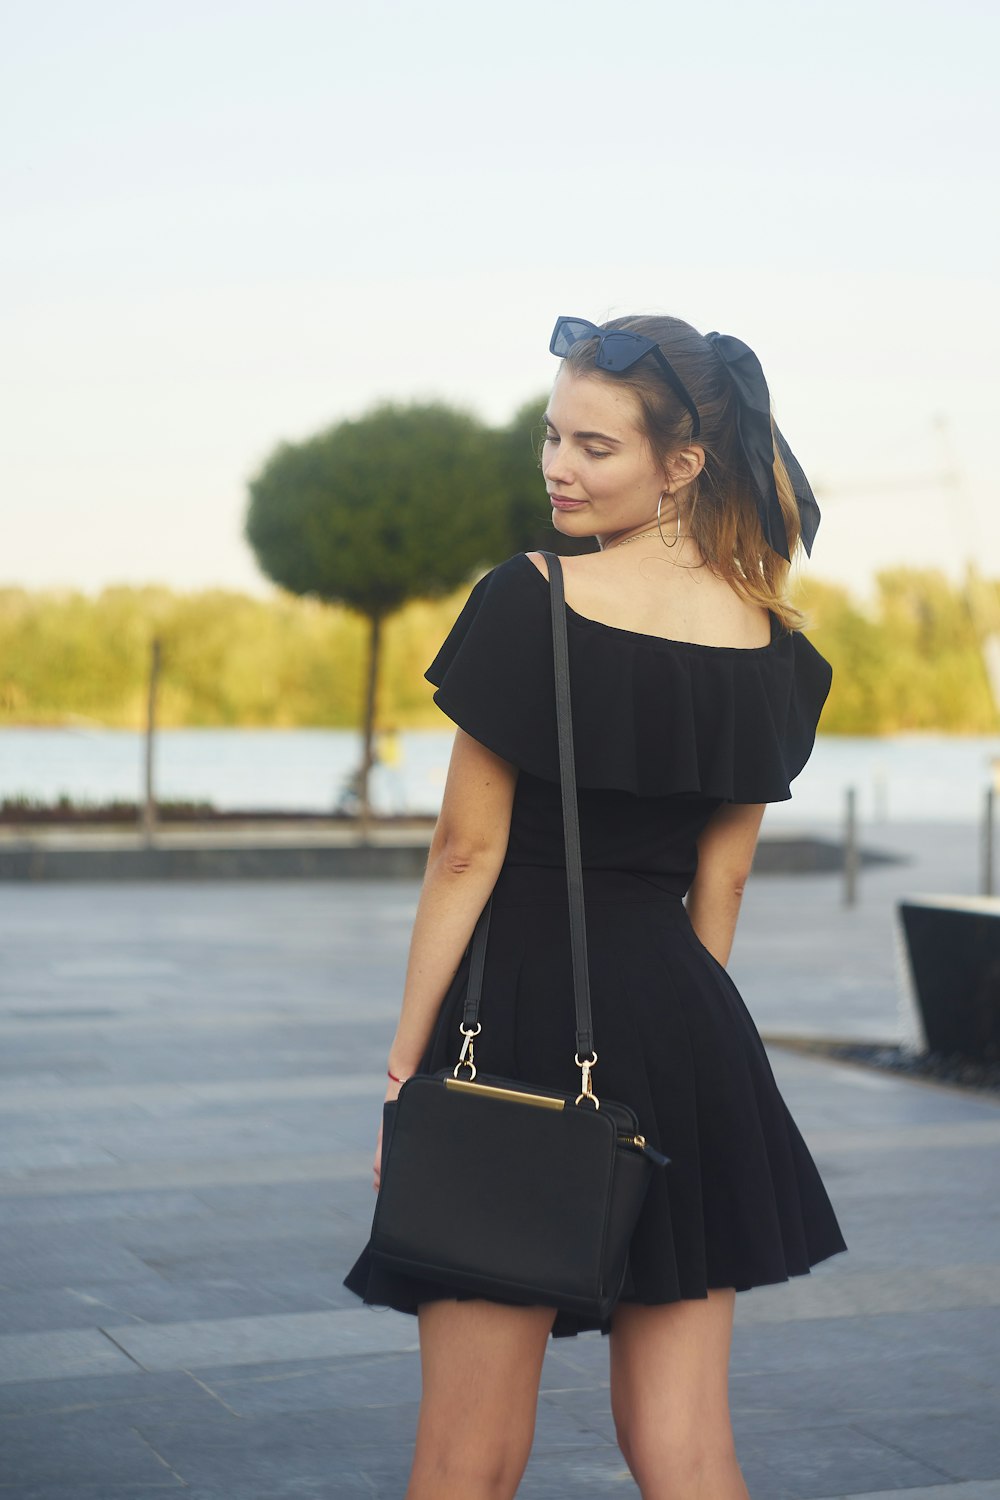 a woman in a black dress is holding a black purse